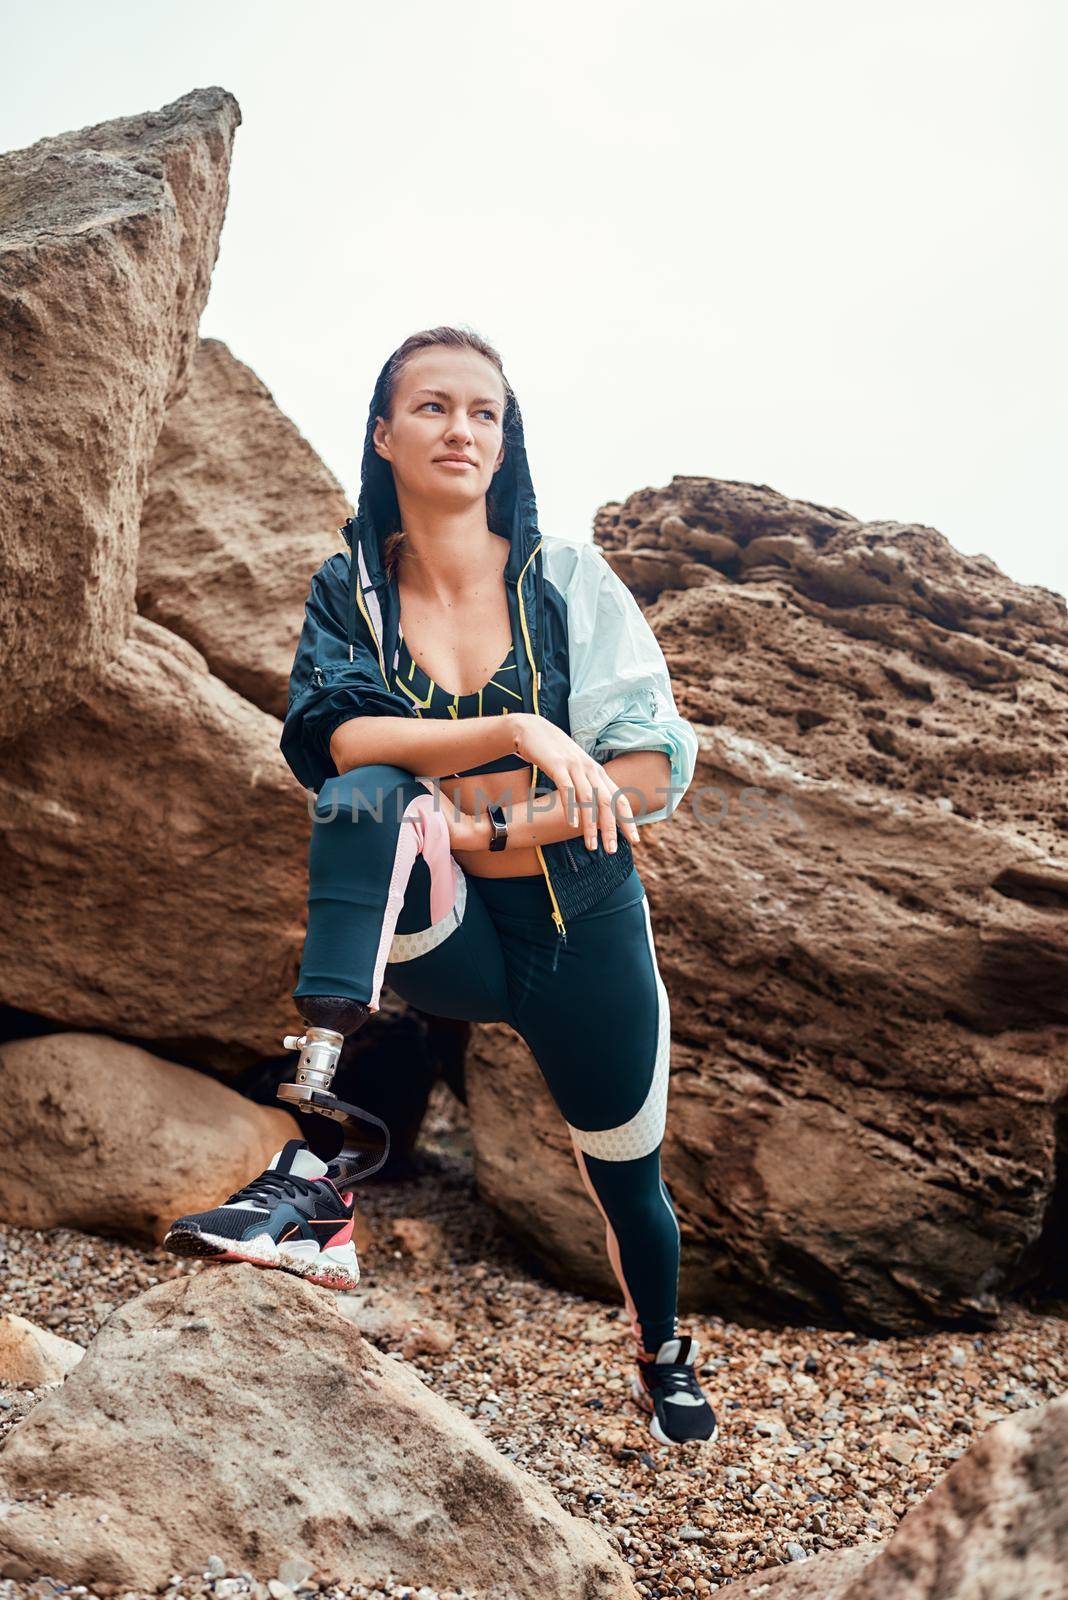 After workout. Vertical photo of disabled athlete woman in sportswear with prosthetic leg standing on the beach and looking at camera. by friendsstock